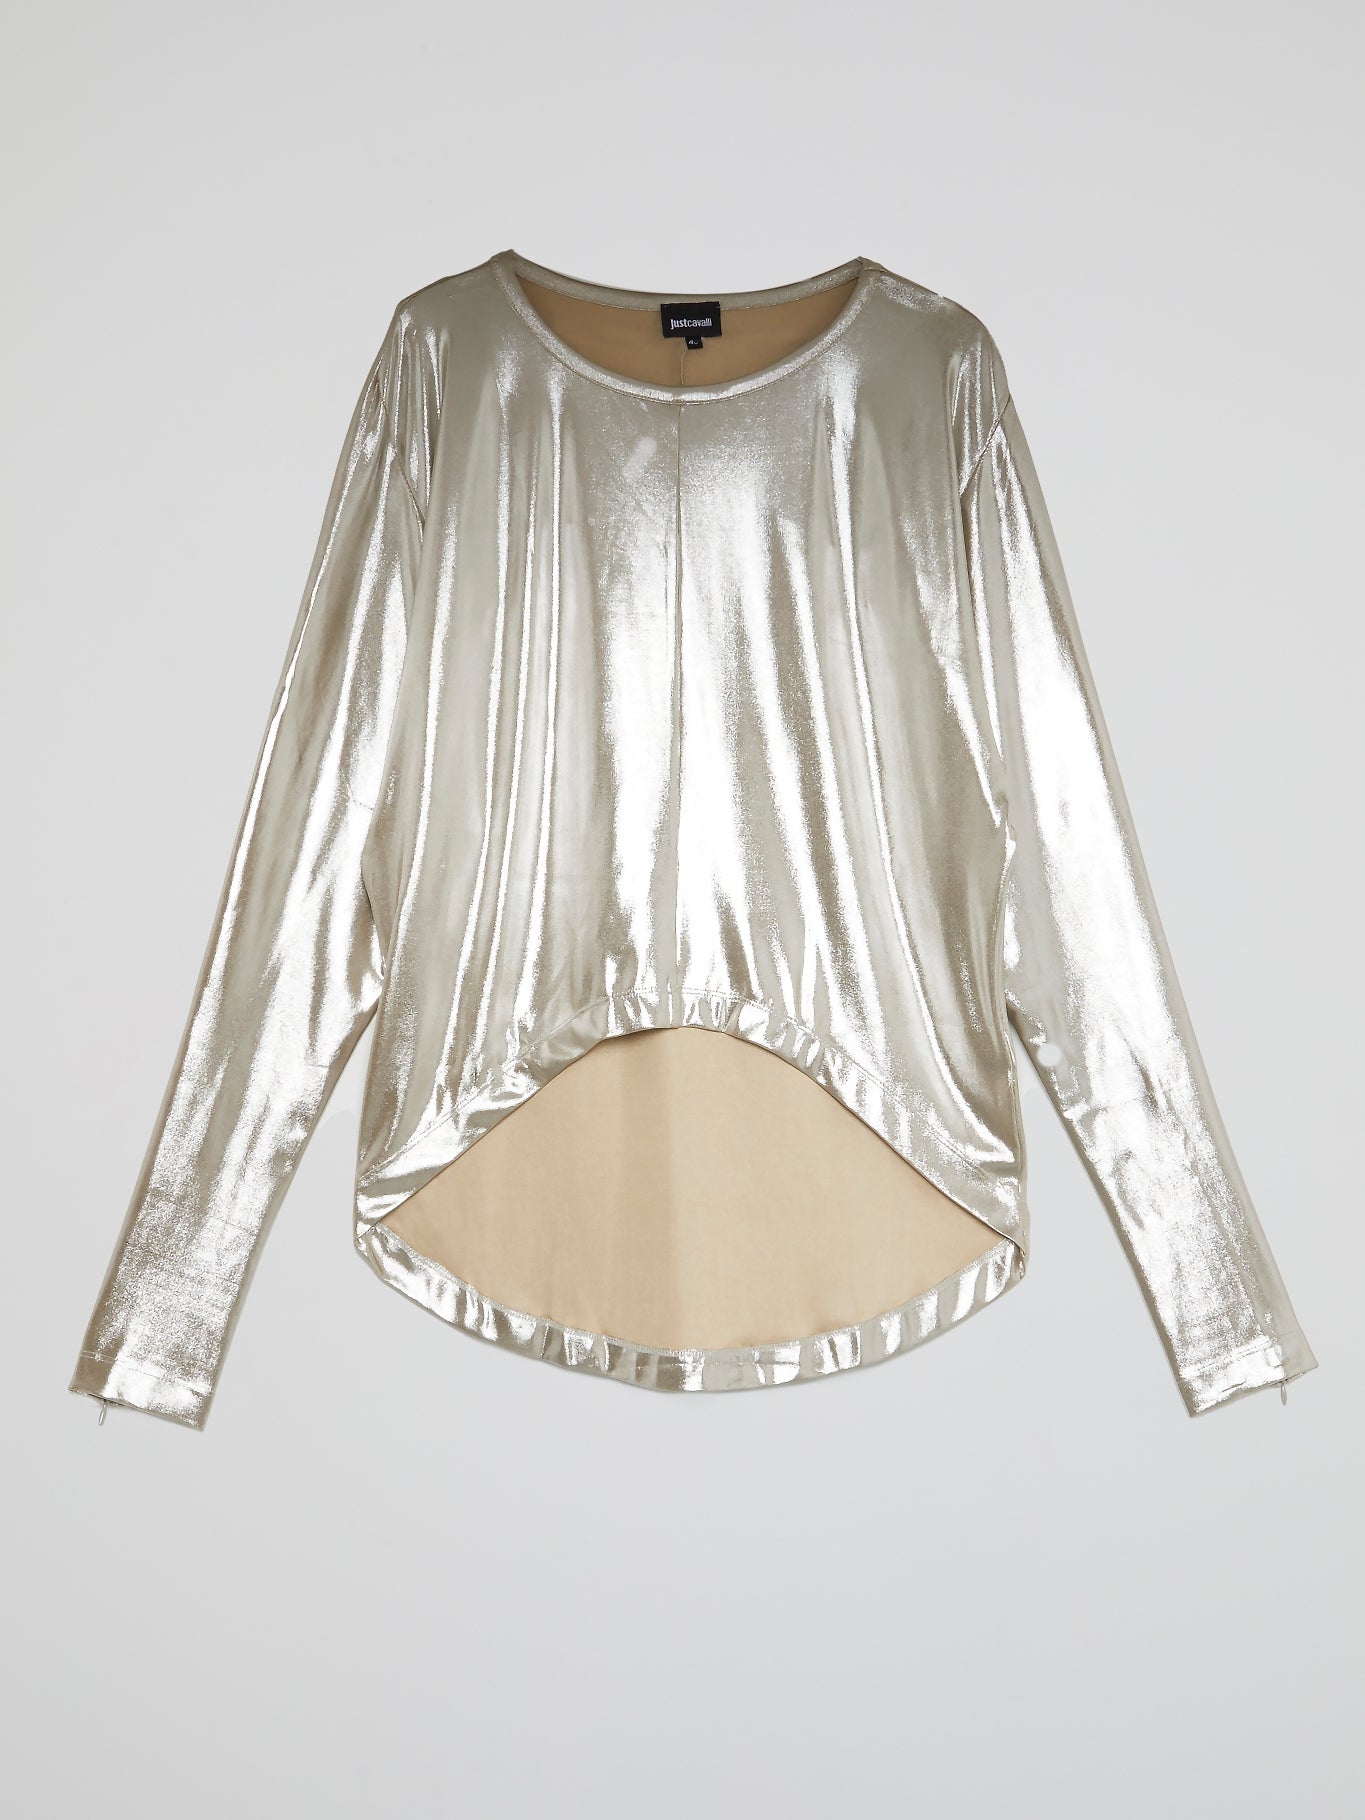 Gold High-Low Swing Top